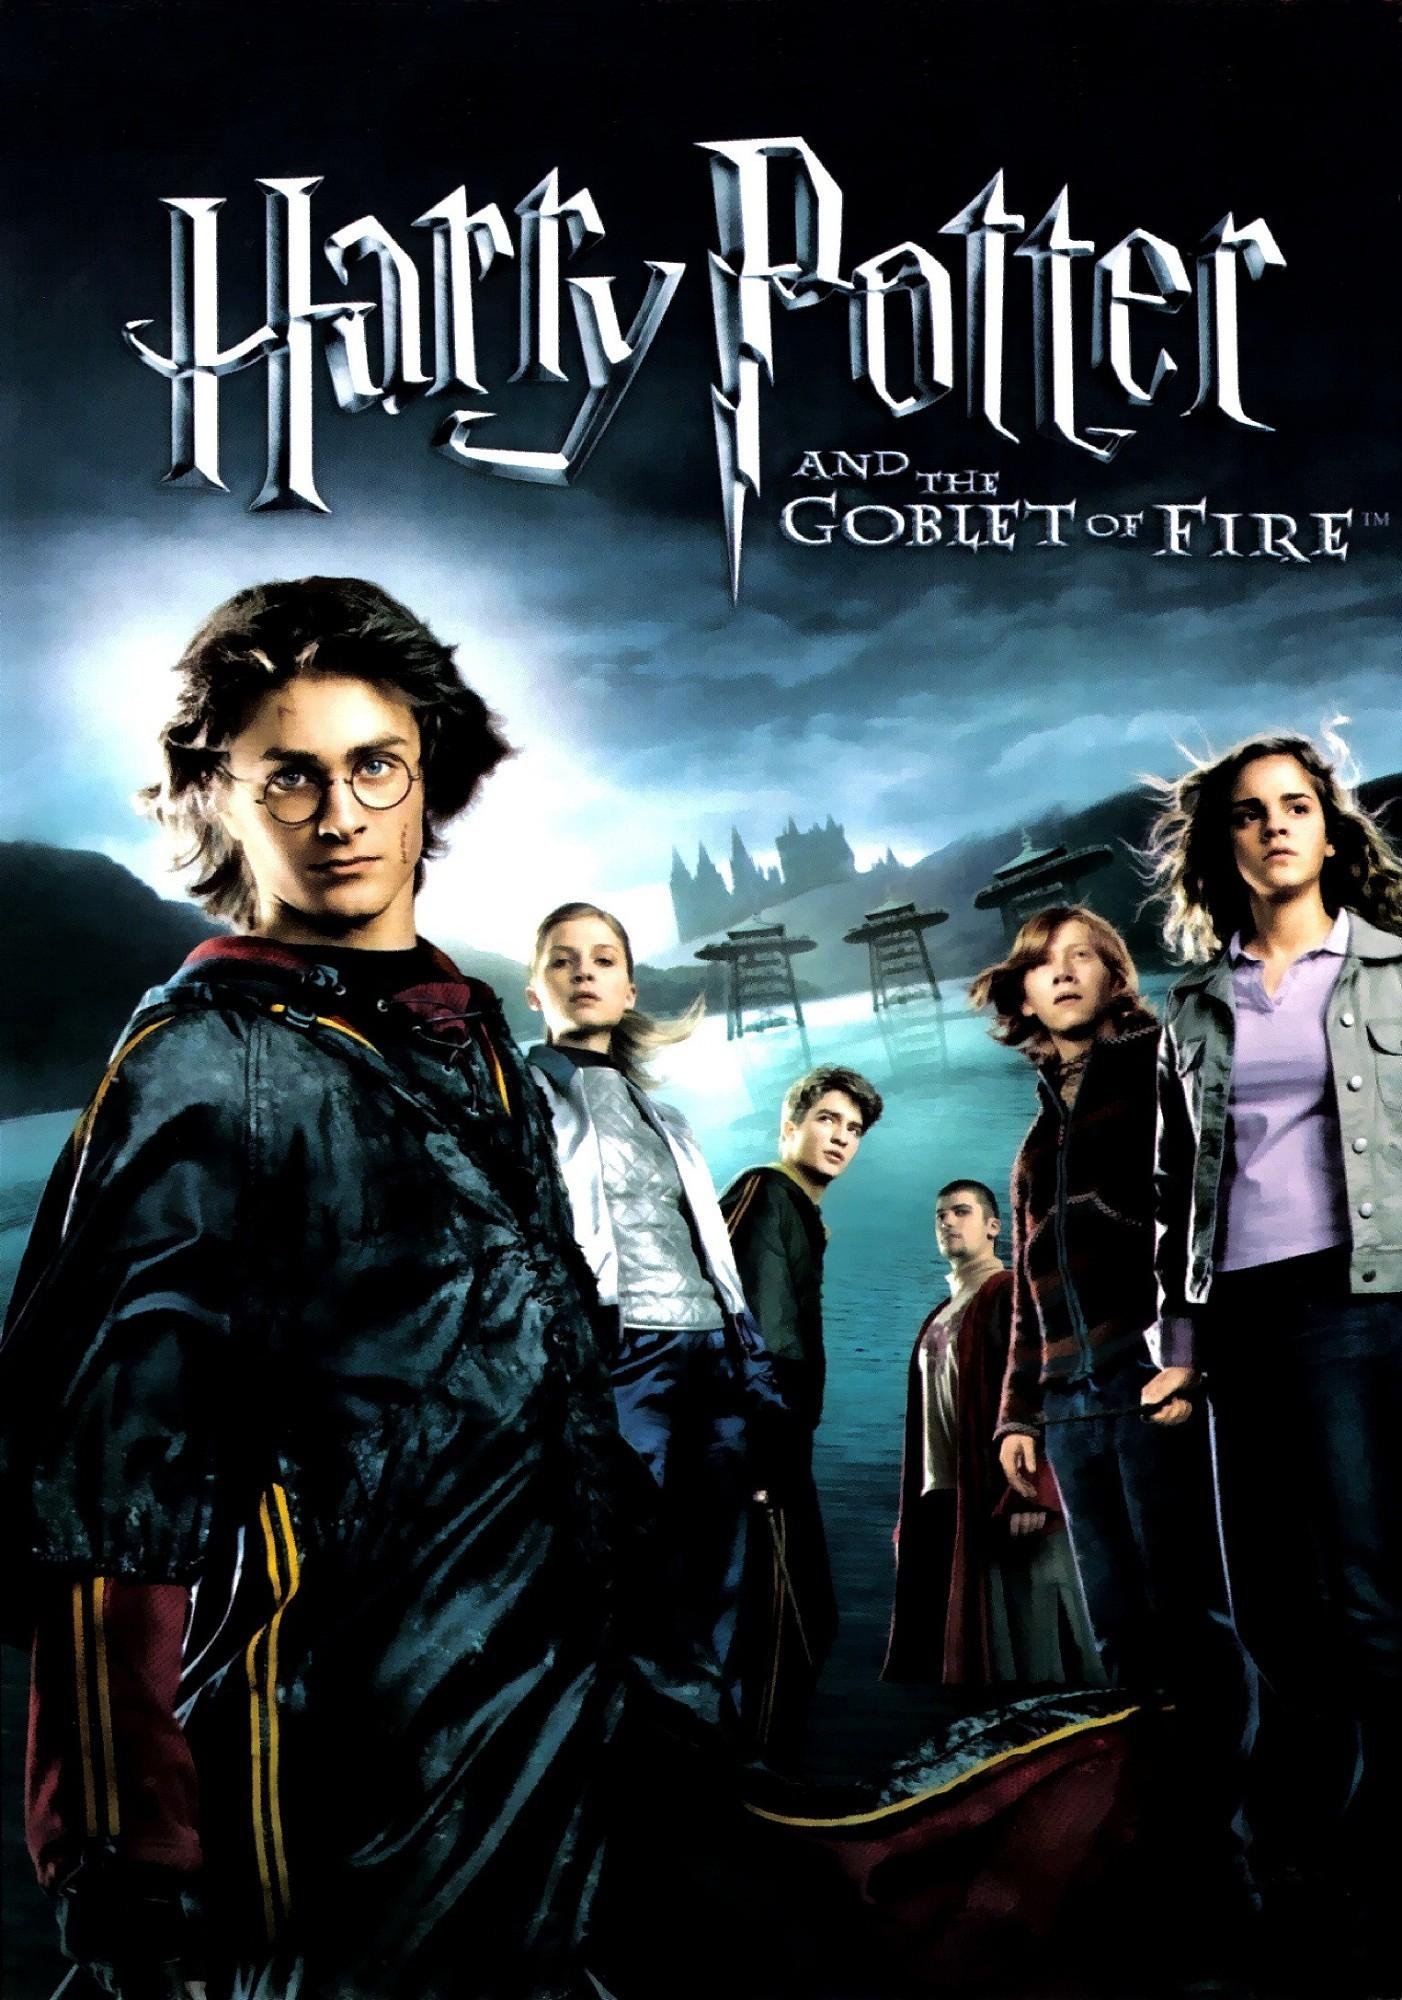 Poster of the movie Harry Potter and the Goblet of Fire